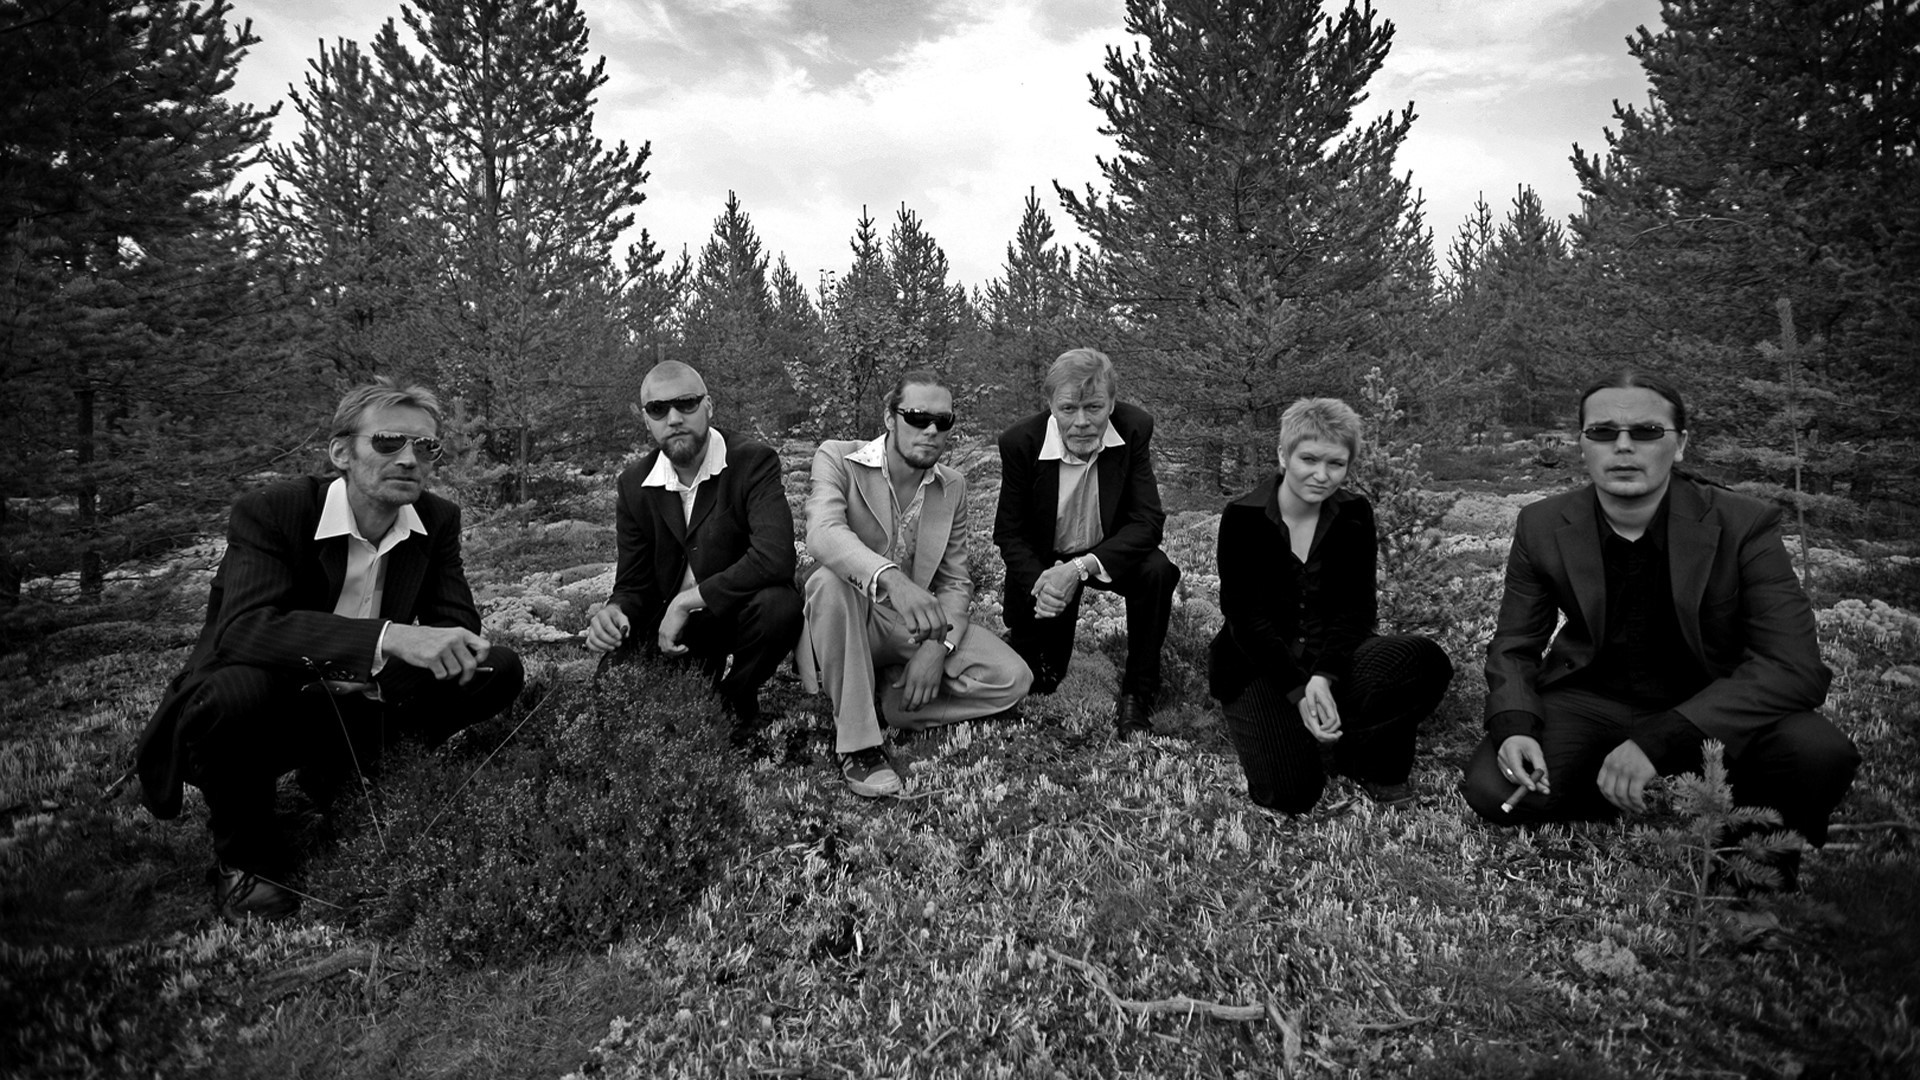 1920x1080  Harmaja, Band, Members, Trees, Suits wallpaper and background JPG